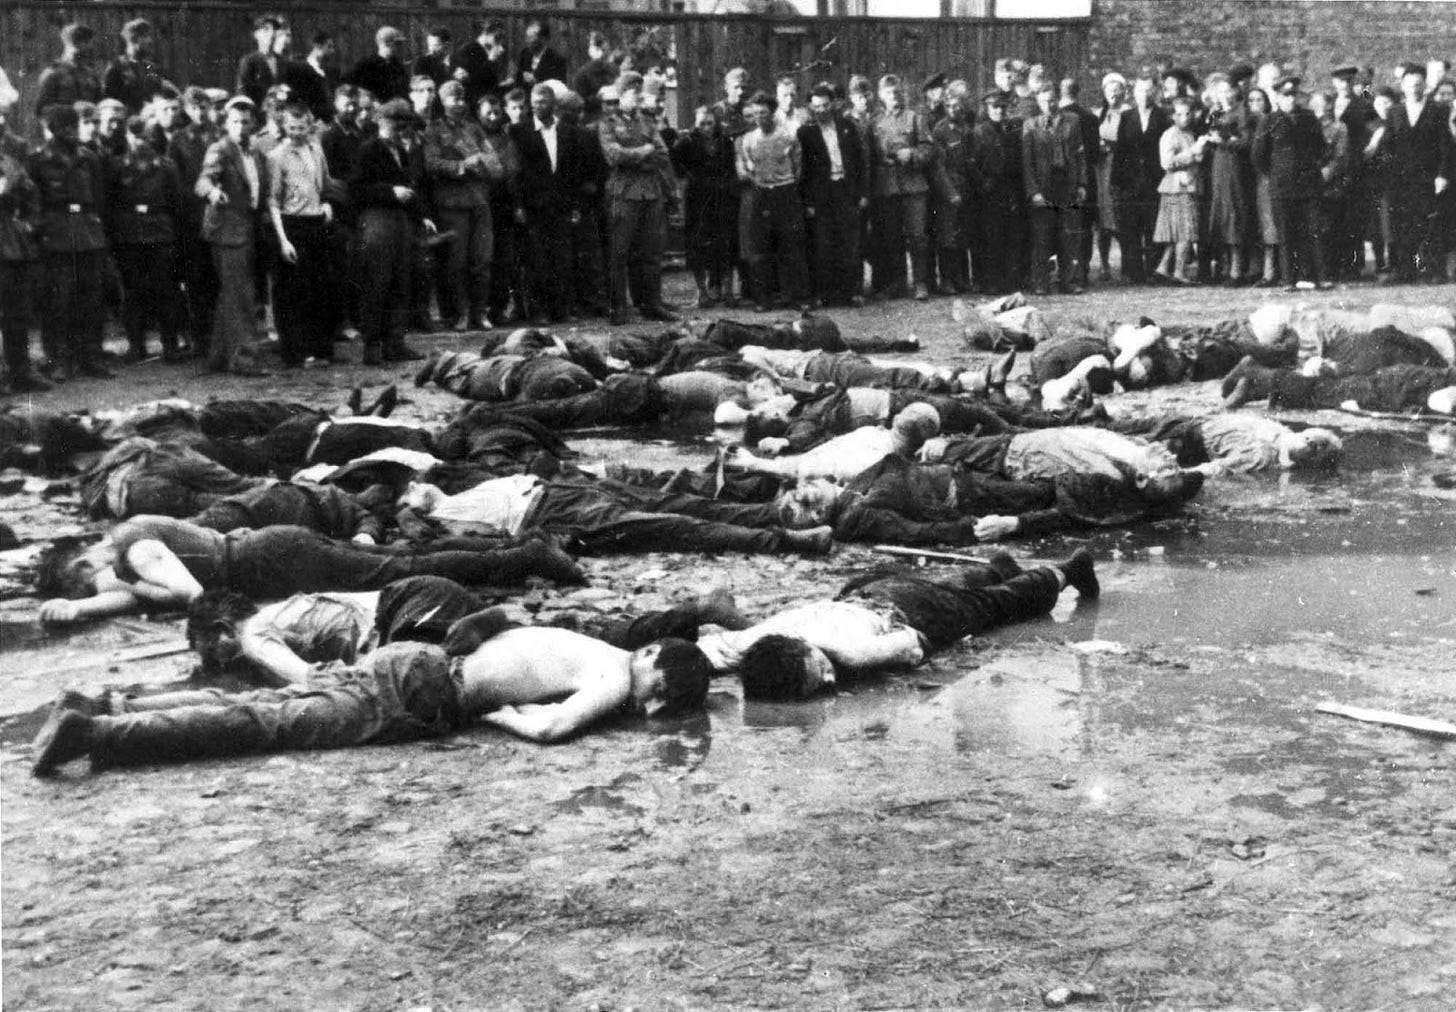 Crowd views the aftermath of a massacre at Lietukis Garage, where pro-German Lithuanian nationalists killed more than 40-60 Jewish men.